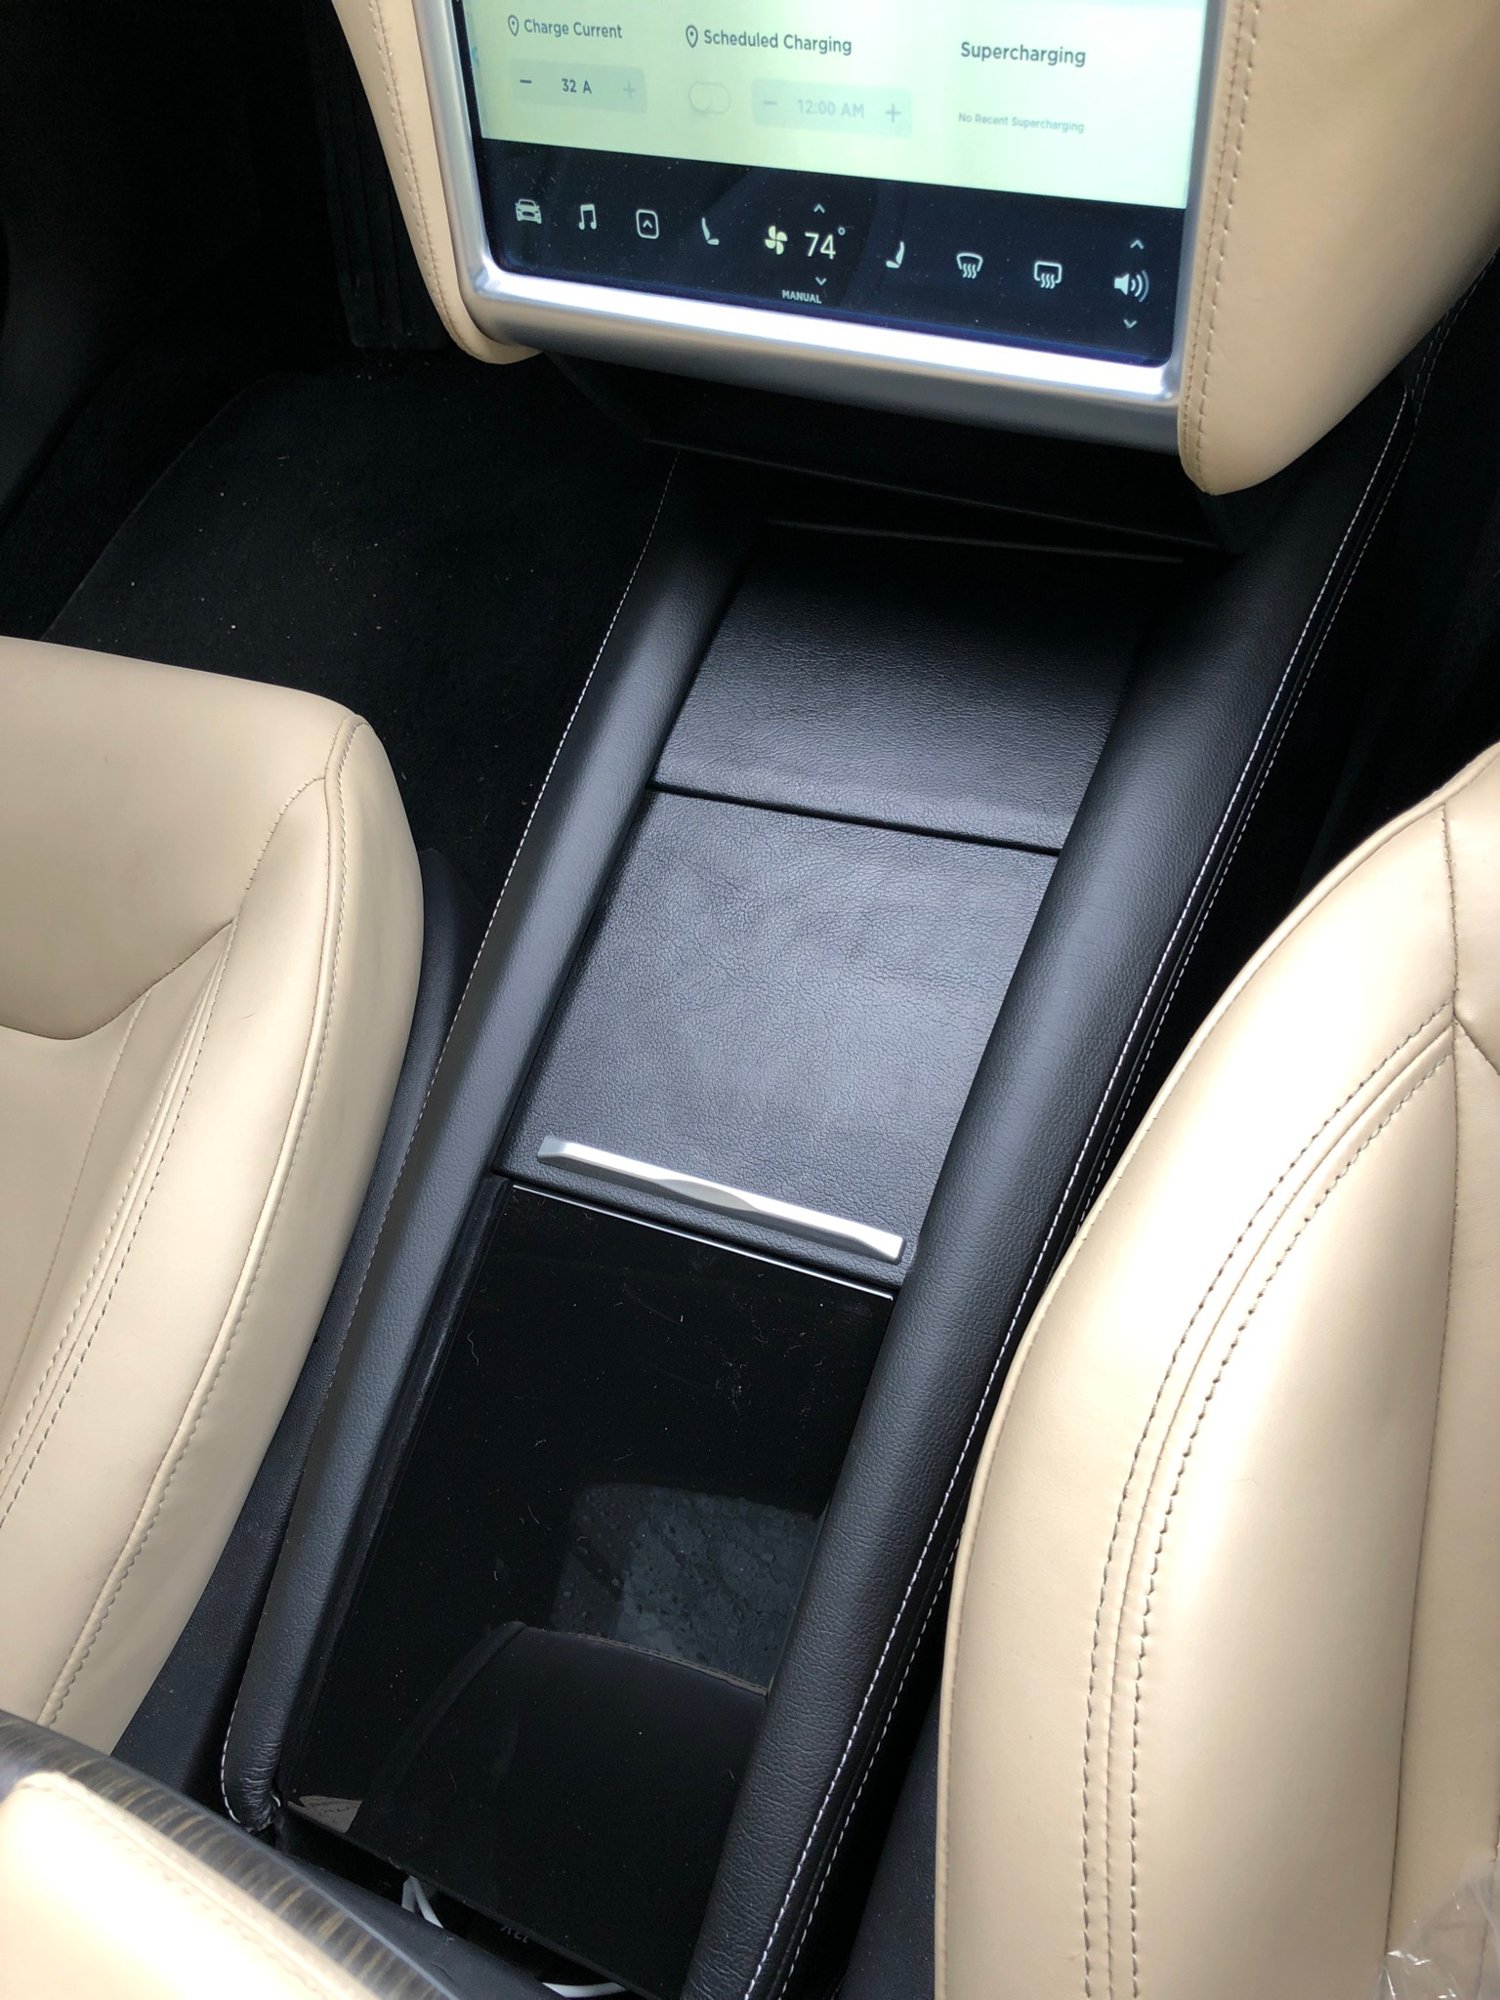 Taptes Center Console Delivered Today | Tesla Motors Club